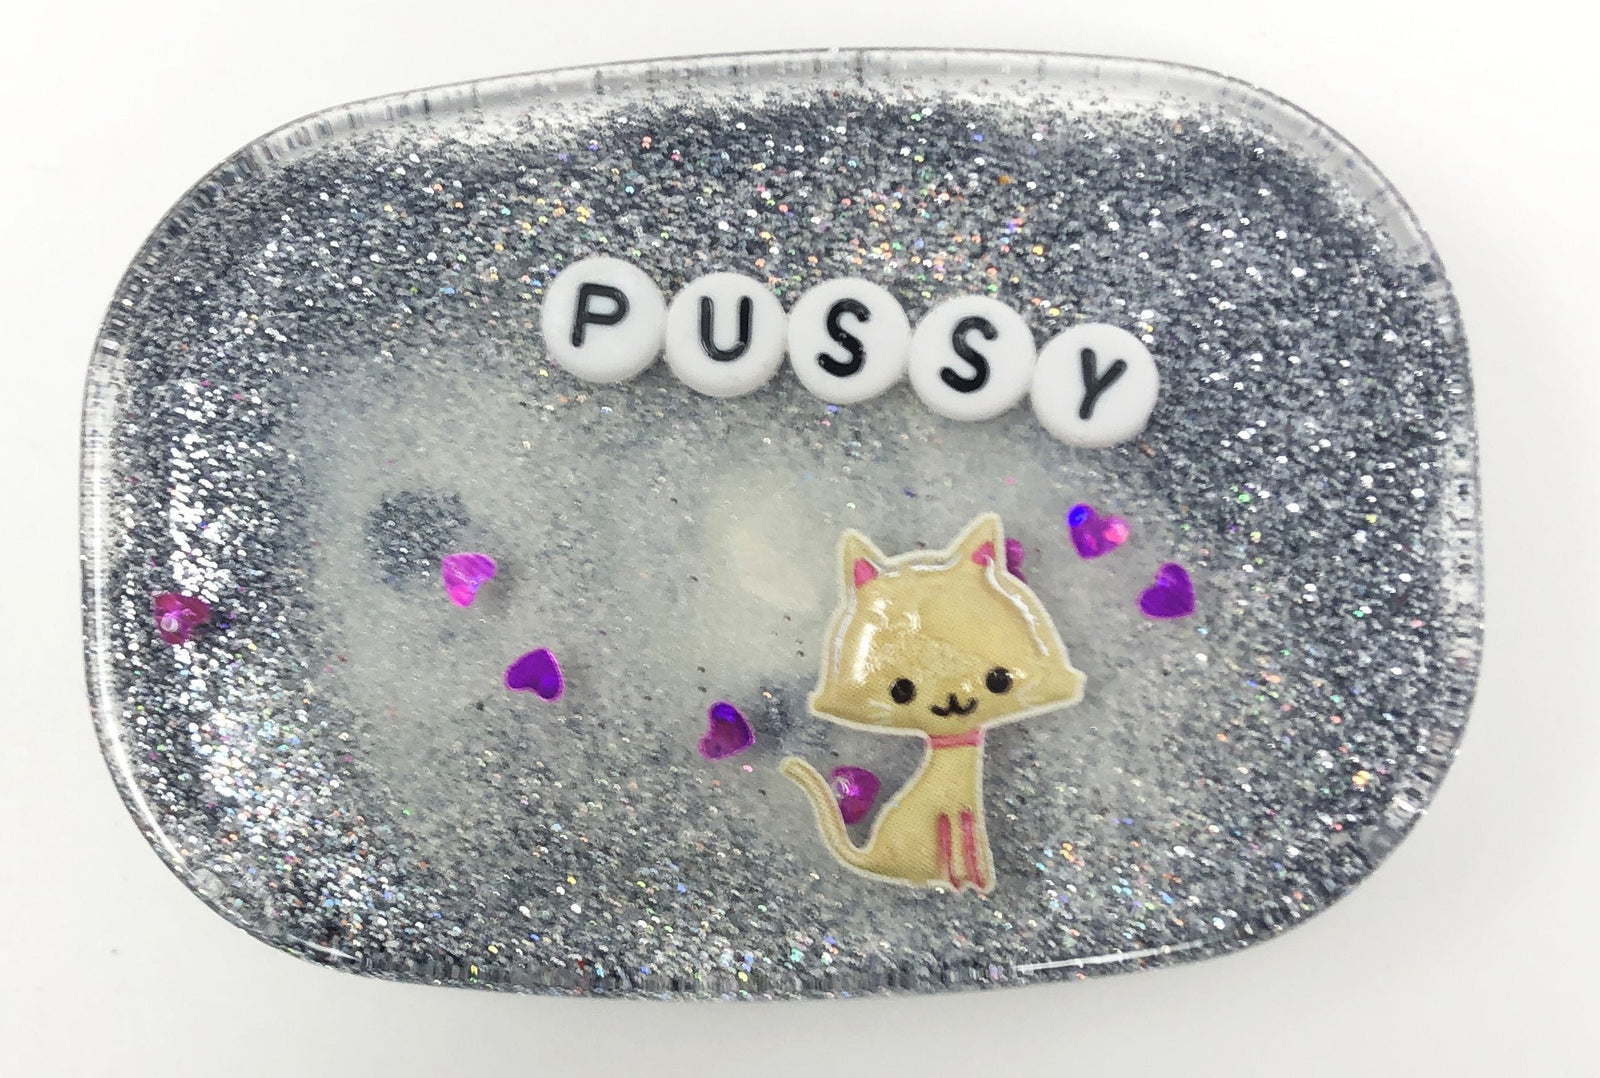 Pussy - Shower Art - READY TO SHIP